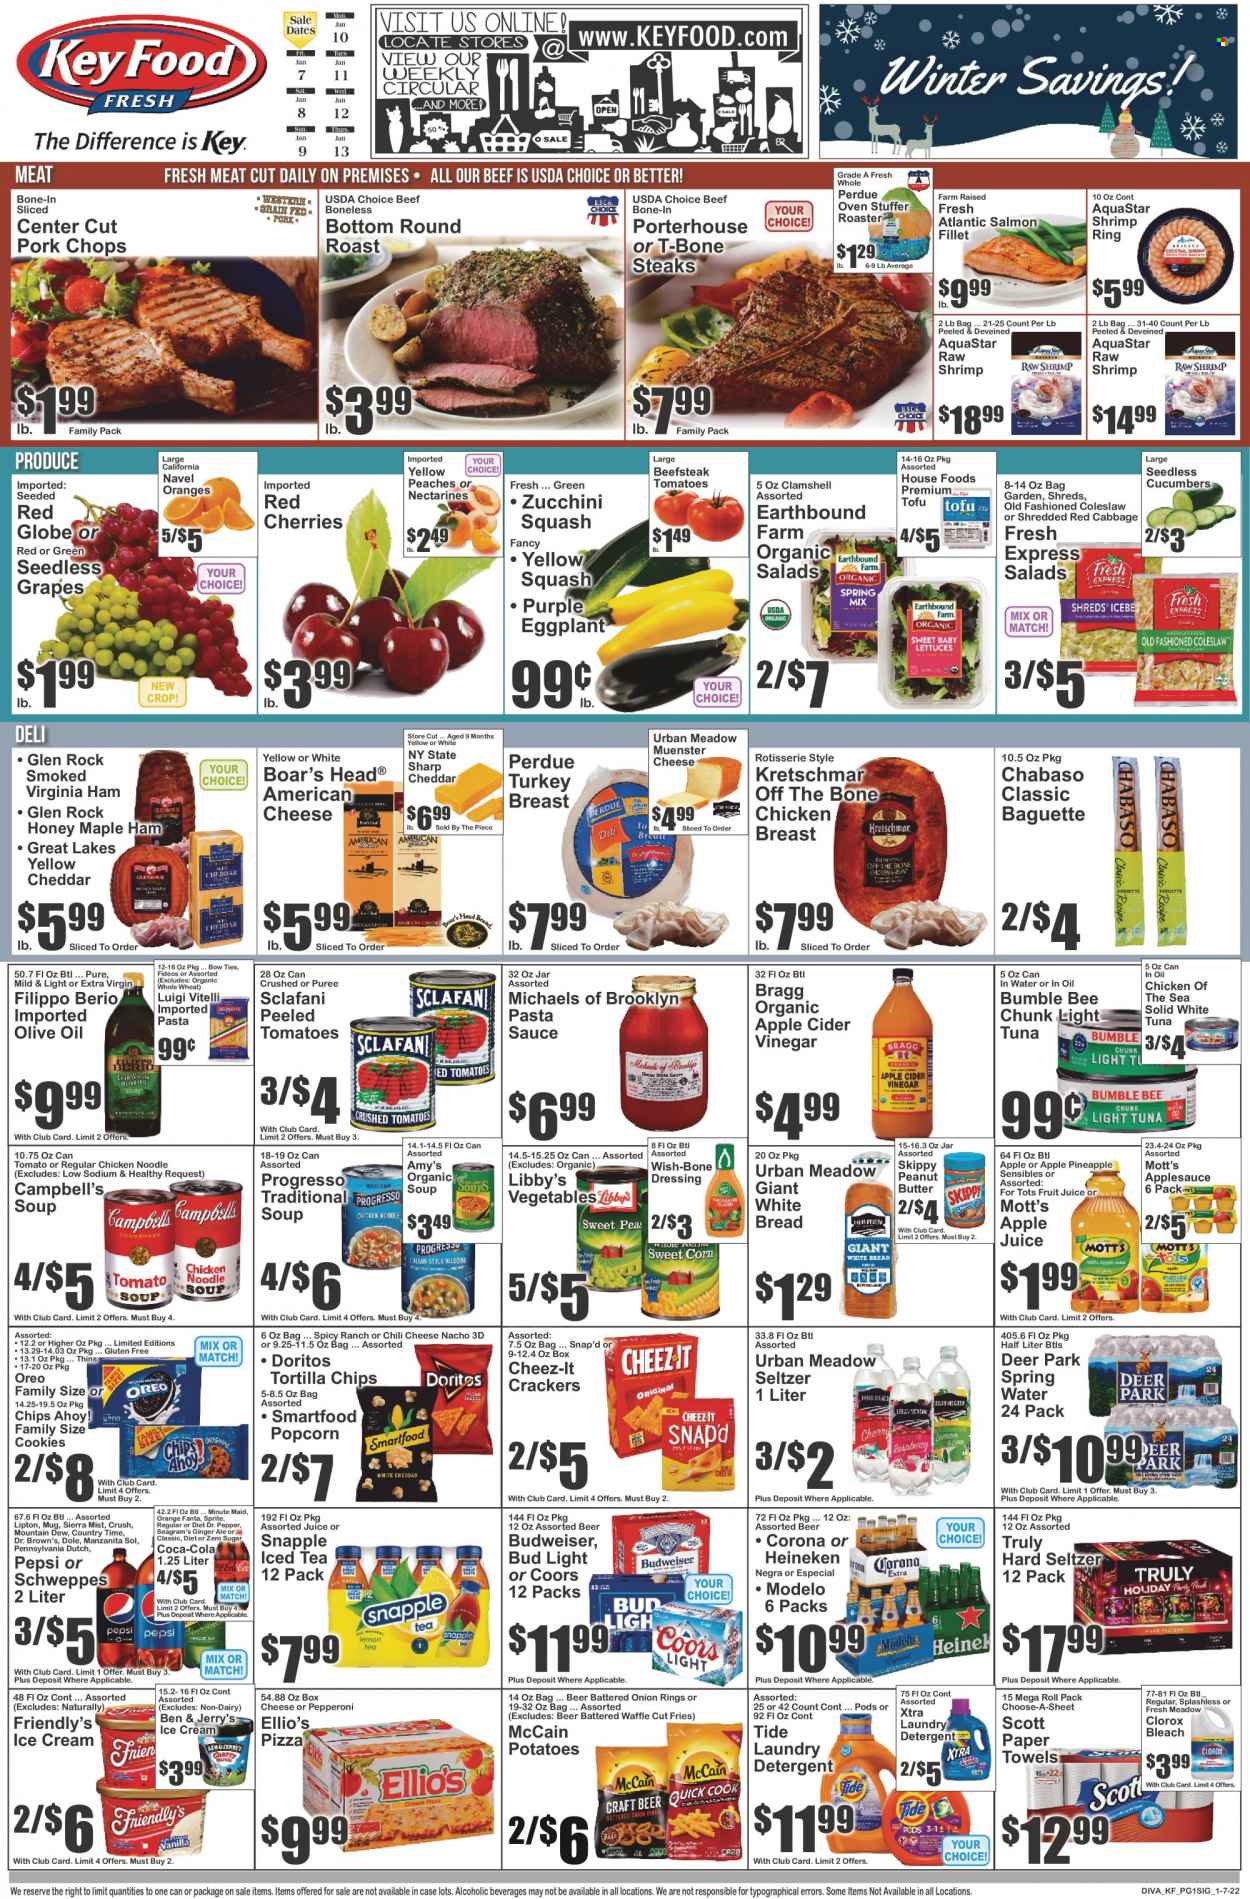 thumbnail - Key Food Flyer - 01/07/2022 - 01/13/2022 - Sales products - seedless grapes, baguette, bread, white bread, cabbage, cucumber, zucchini, potatoes, salad, Dole, eggplant, yellow squash, grapes, Red Globe, pineapple, oranges, Mott's, salmon, salmon fillet, tuna, shrimps, Campbell's, coleslaw, pizza, pasta sauce, onion rings, soup, Bumble Bee, sauce, noodles, Progresso, Perdue®, ham, virginia ham, american cheese, Münster cheese, tofu, Oreo, ice cream, Ben & Jerry's, Friendly's Ice Cream, McCain, potato fries, cookies, crackers, Chips Ahoy!, Doritos, tortilla chips, chips, Smartfood, Thins, popcorn, Cheez-It, light tuna, Chicken of the Sea, dressing, apple cider vinegar, extra virgin olive oil, olive oil, apple sauce, honey, peanut butter, apple juice, Coca-Cola, ginger ale, Mountain Dew, Schweppes, Sprite, Pepsi, juice, fruit juice, Fanta, Lipton, ice tea, Dr. Pepper, Snapple, Dr. Brown's, Sierra Mist, Country Time, fruit punch, spring water, Hard Seltzer, TRULY, beer, Bud Light, Corona Extra, Heineken, Modelo, chicken breasts, beef meat, t-bone steak, steak, round roast, pork chops, pork meat, Scott, kitchen towels, paper towels, detergent, bleach, Clorox, Tide, laundry detergent, XTRA, mug, beef bone, Budweiser, nectarines, Coors, peaches, navel oranges. Page 1.